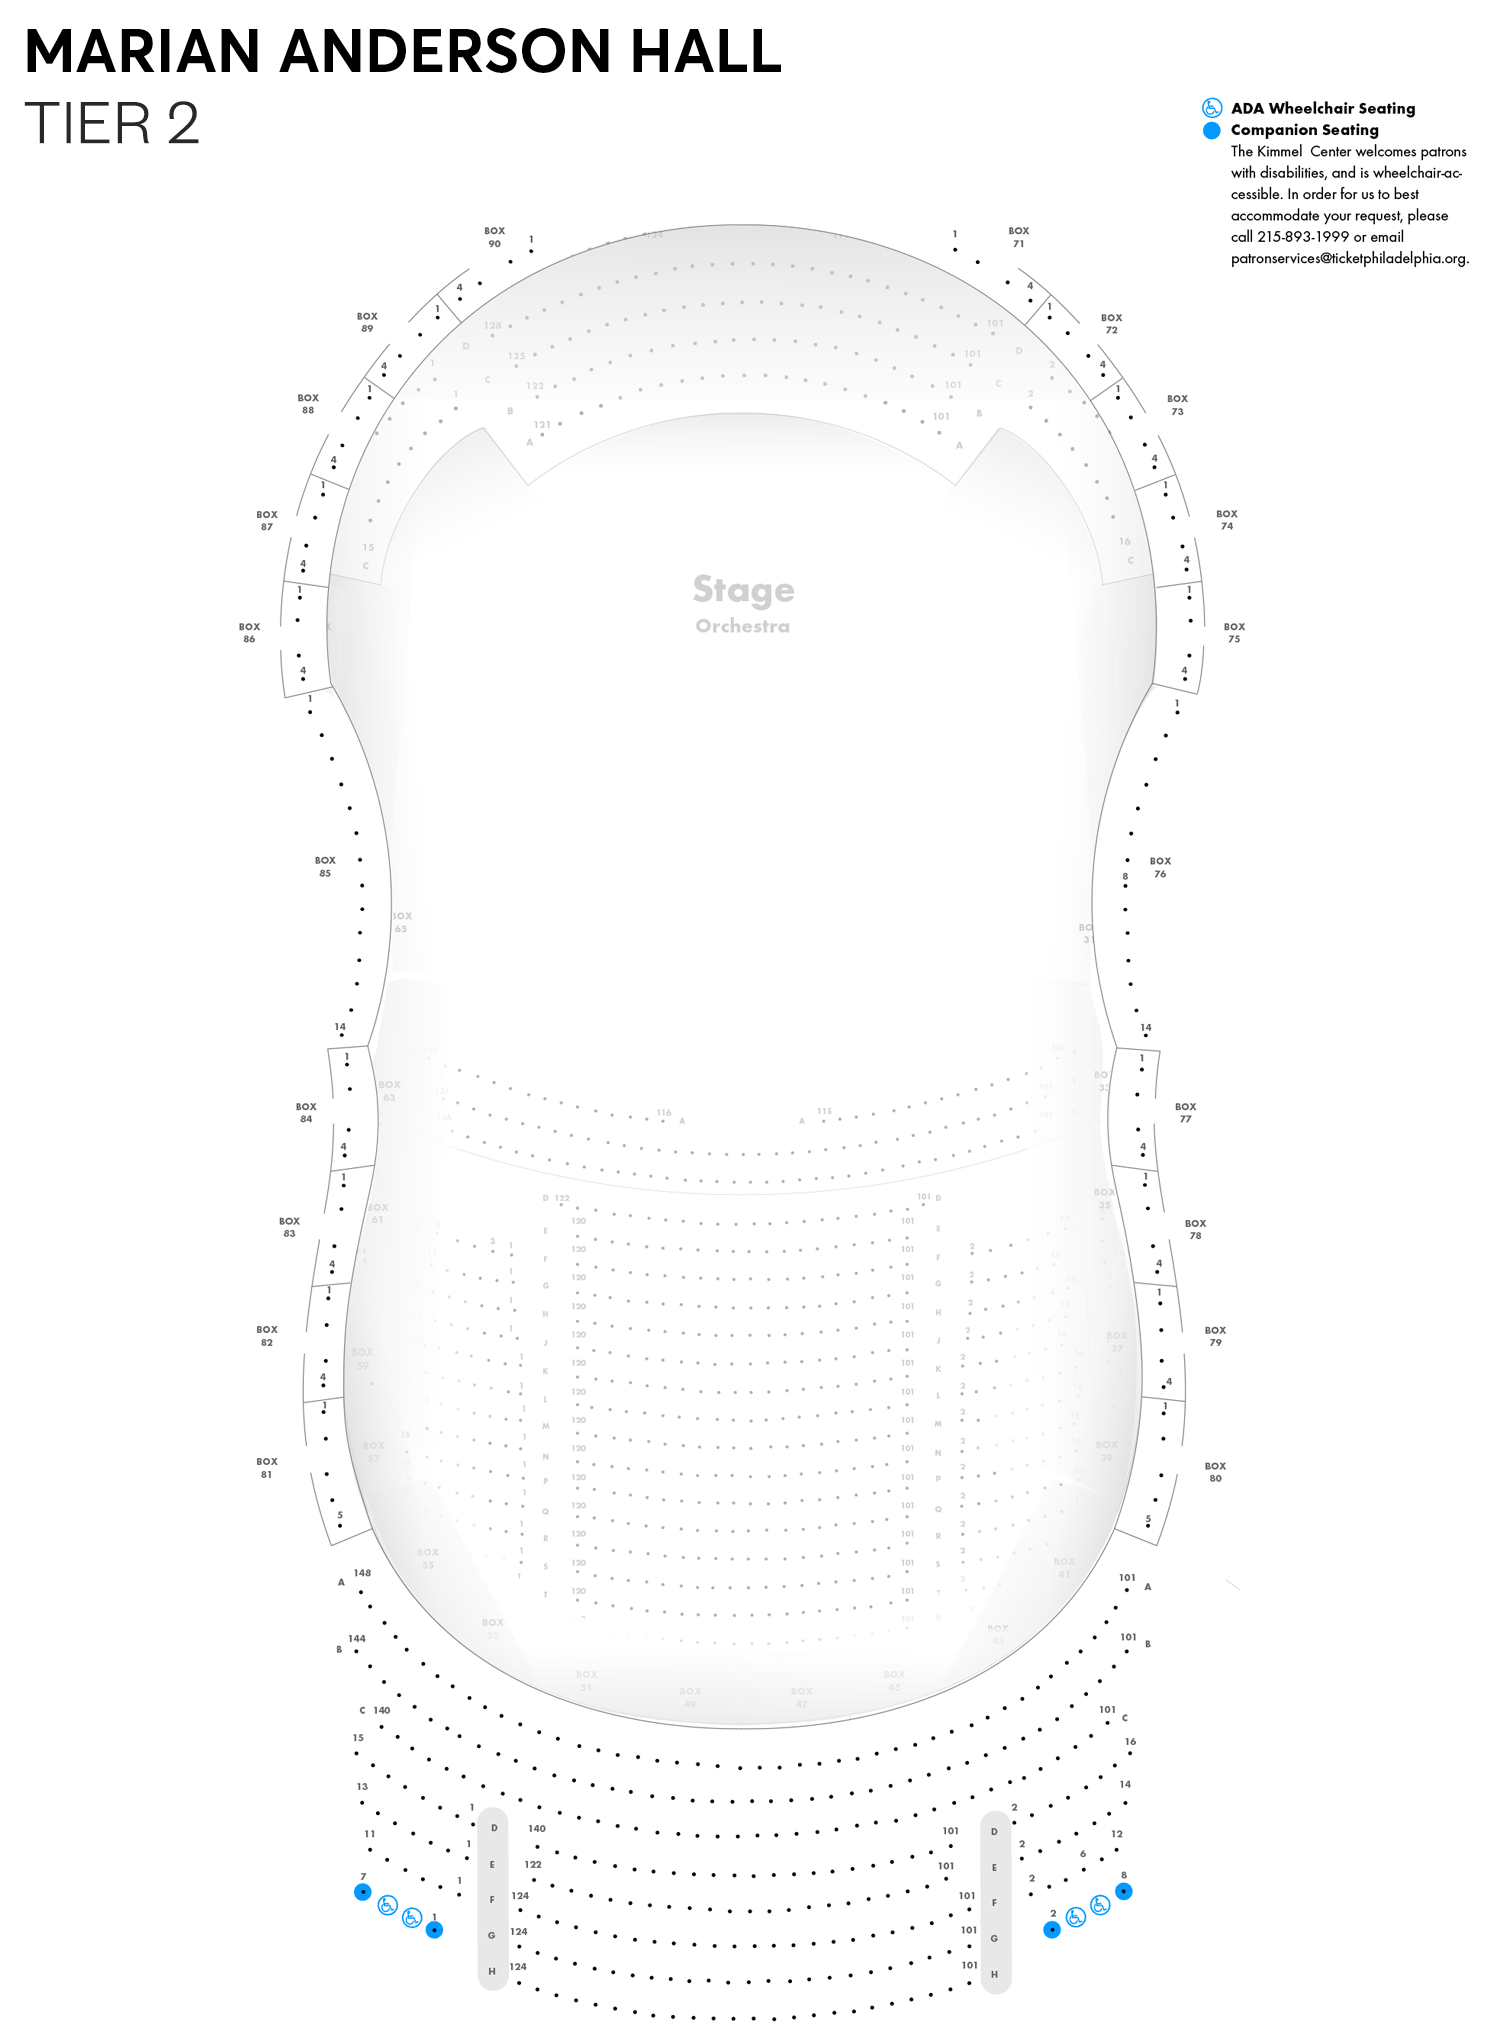 Marian Anderson Hall Seating Chart Tier 2